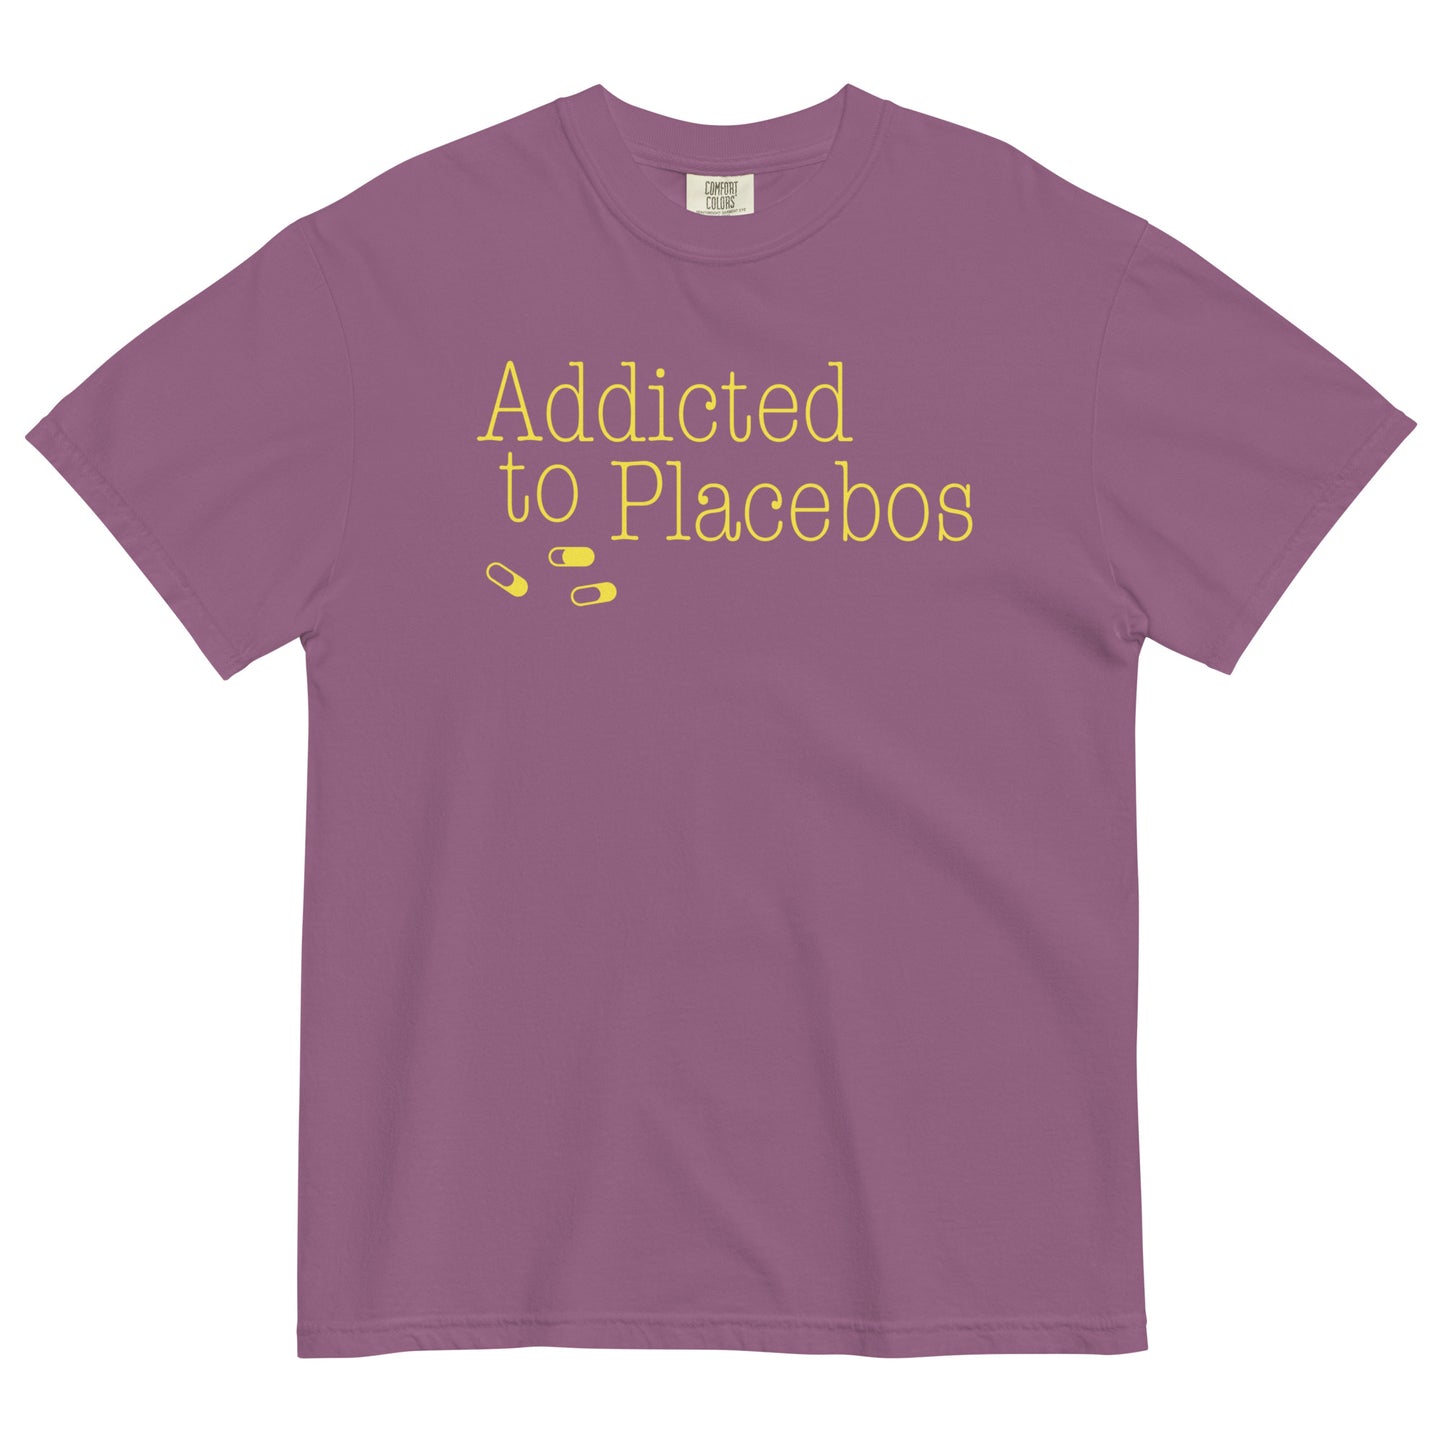 Addicted To Placebos Men's Relaxed Fit Tee